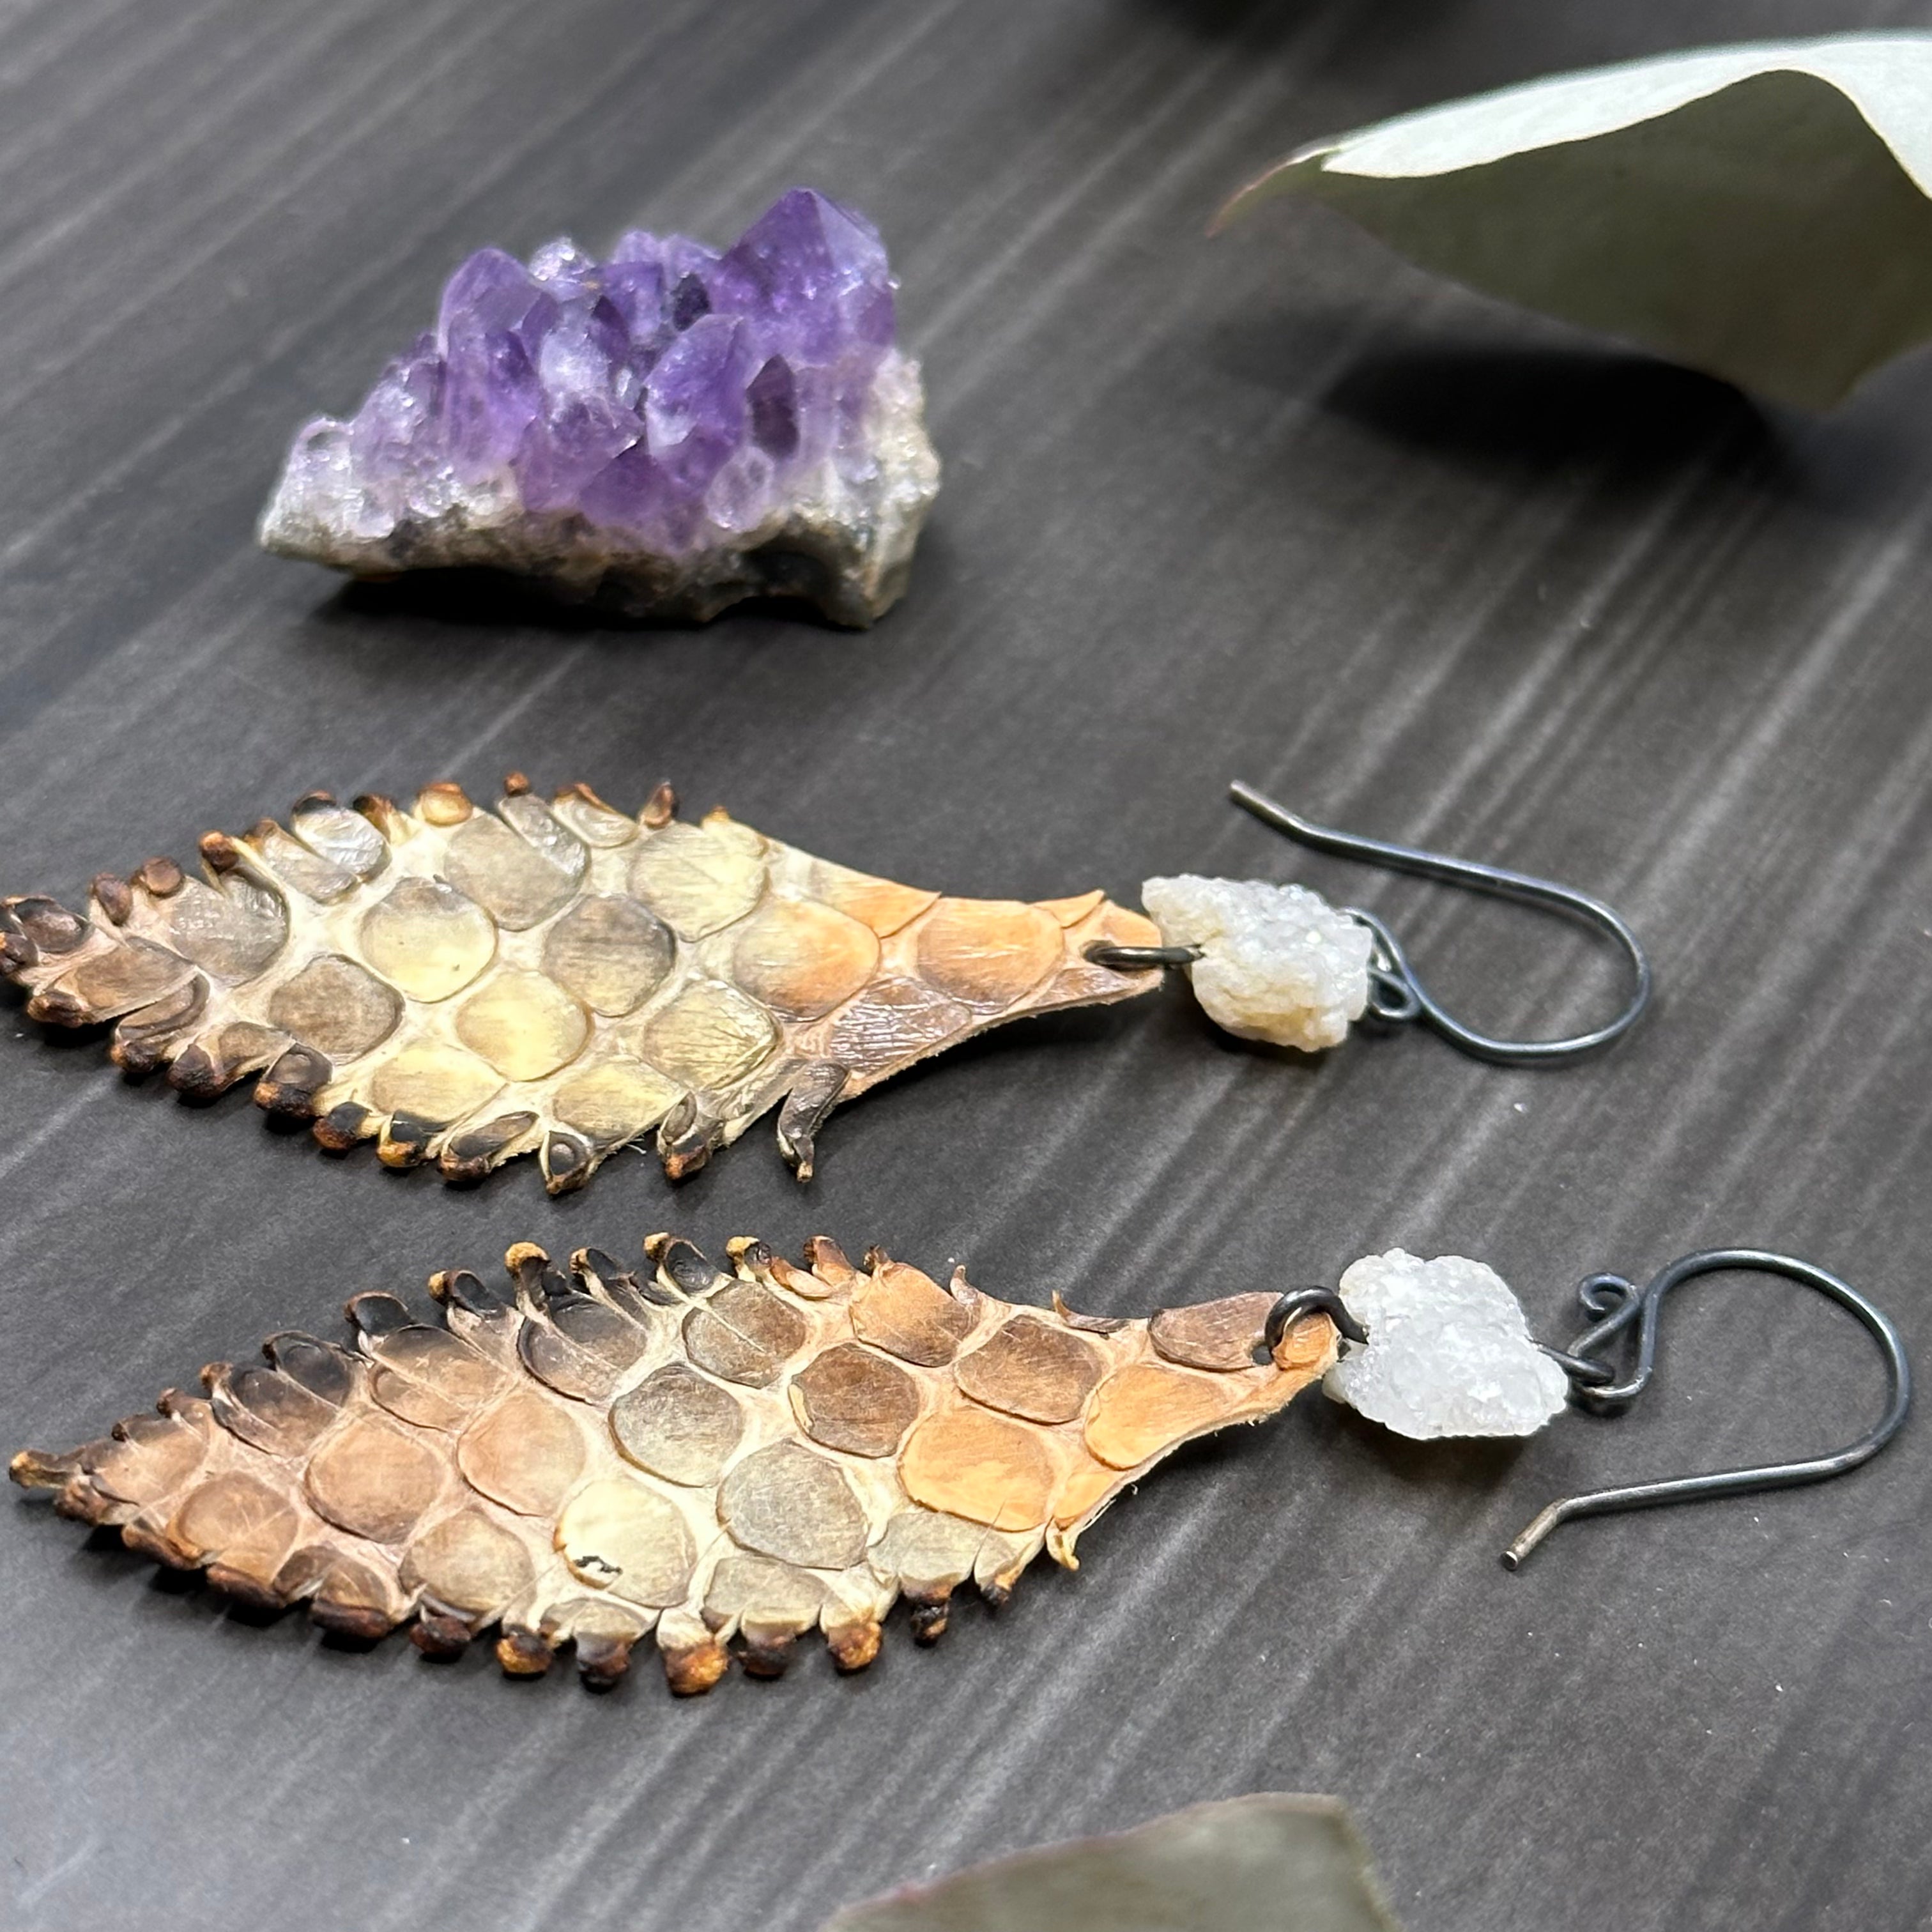 Leather Feather and Drusy Quartz Earrings